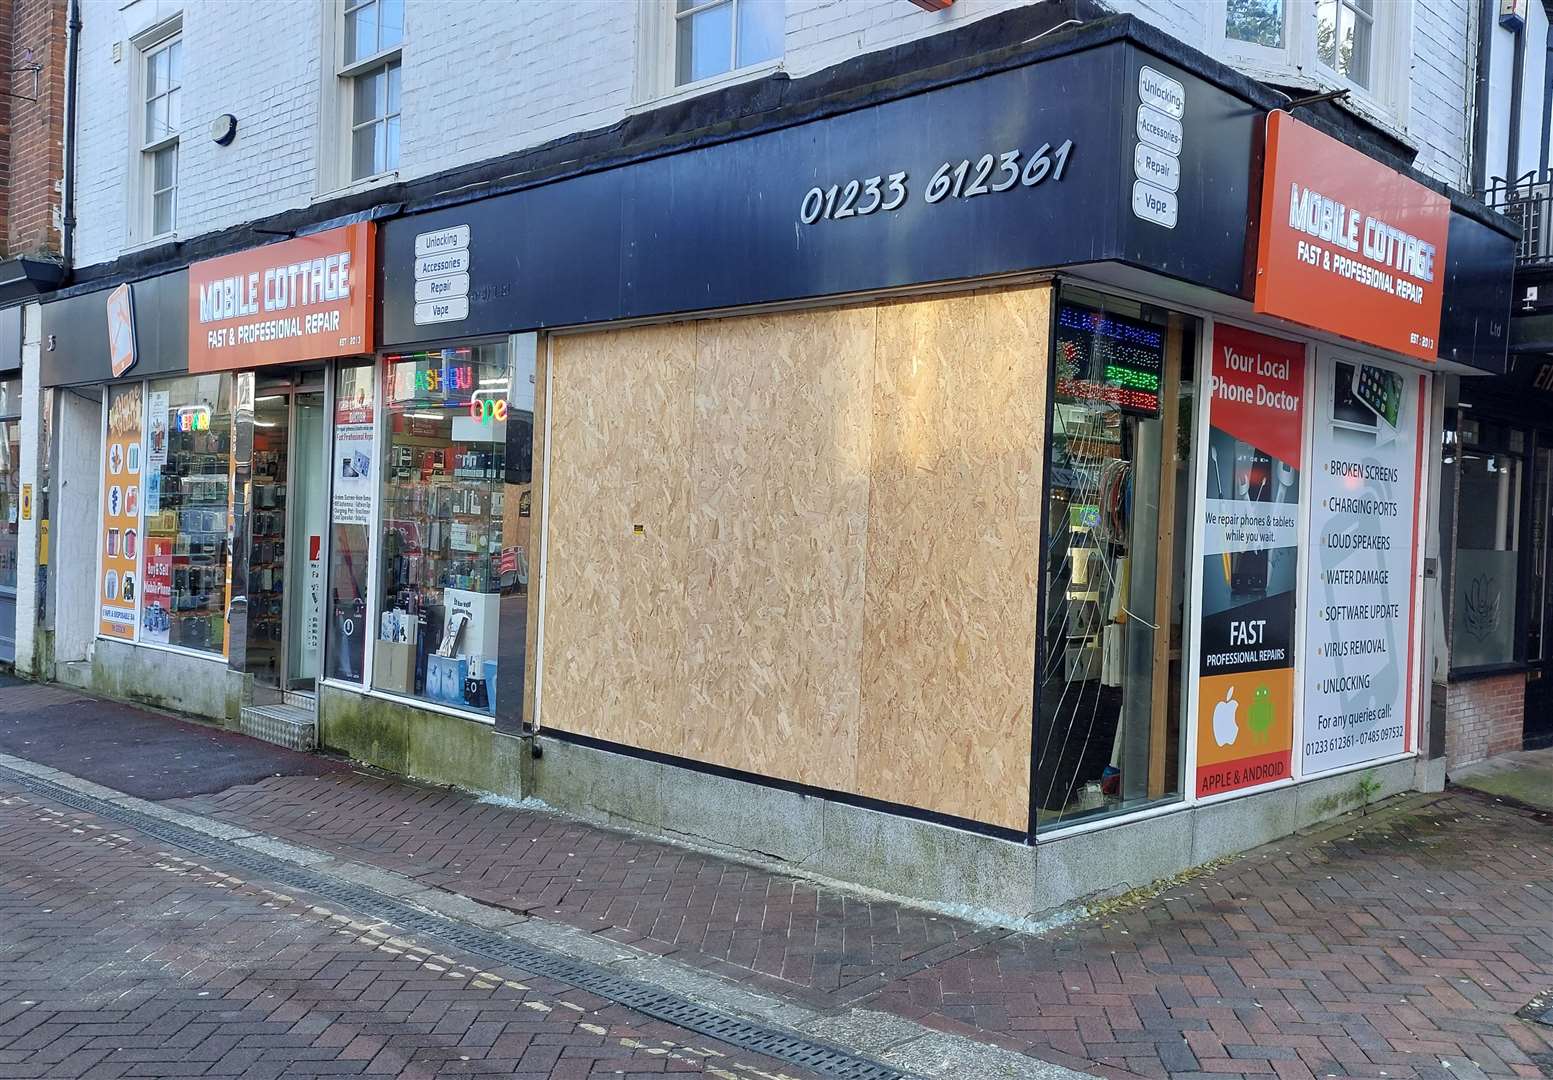 The shop has now been boarded up